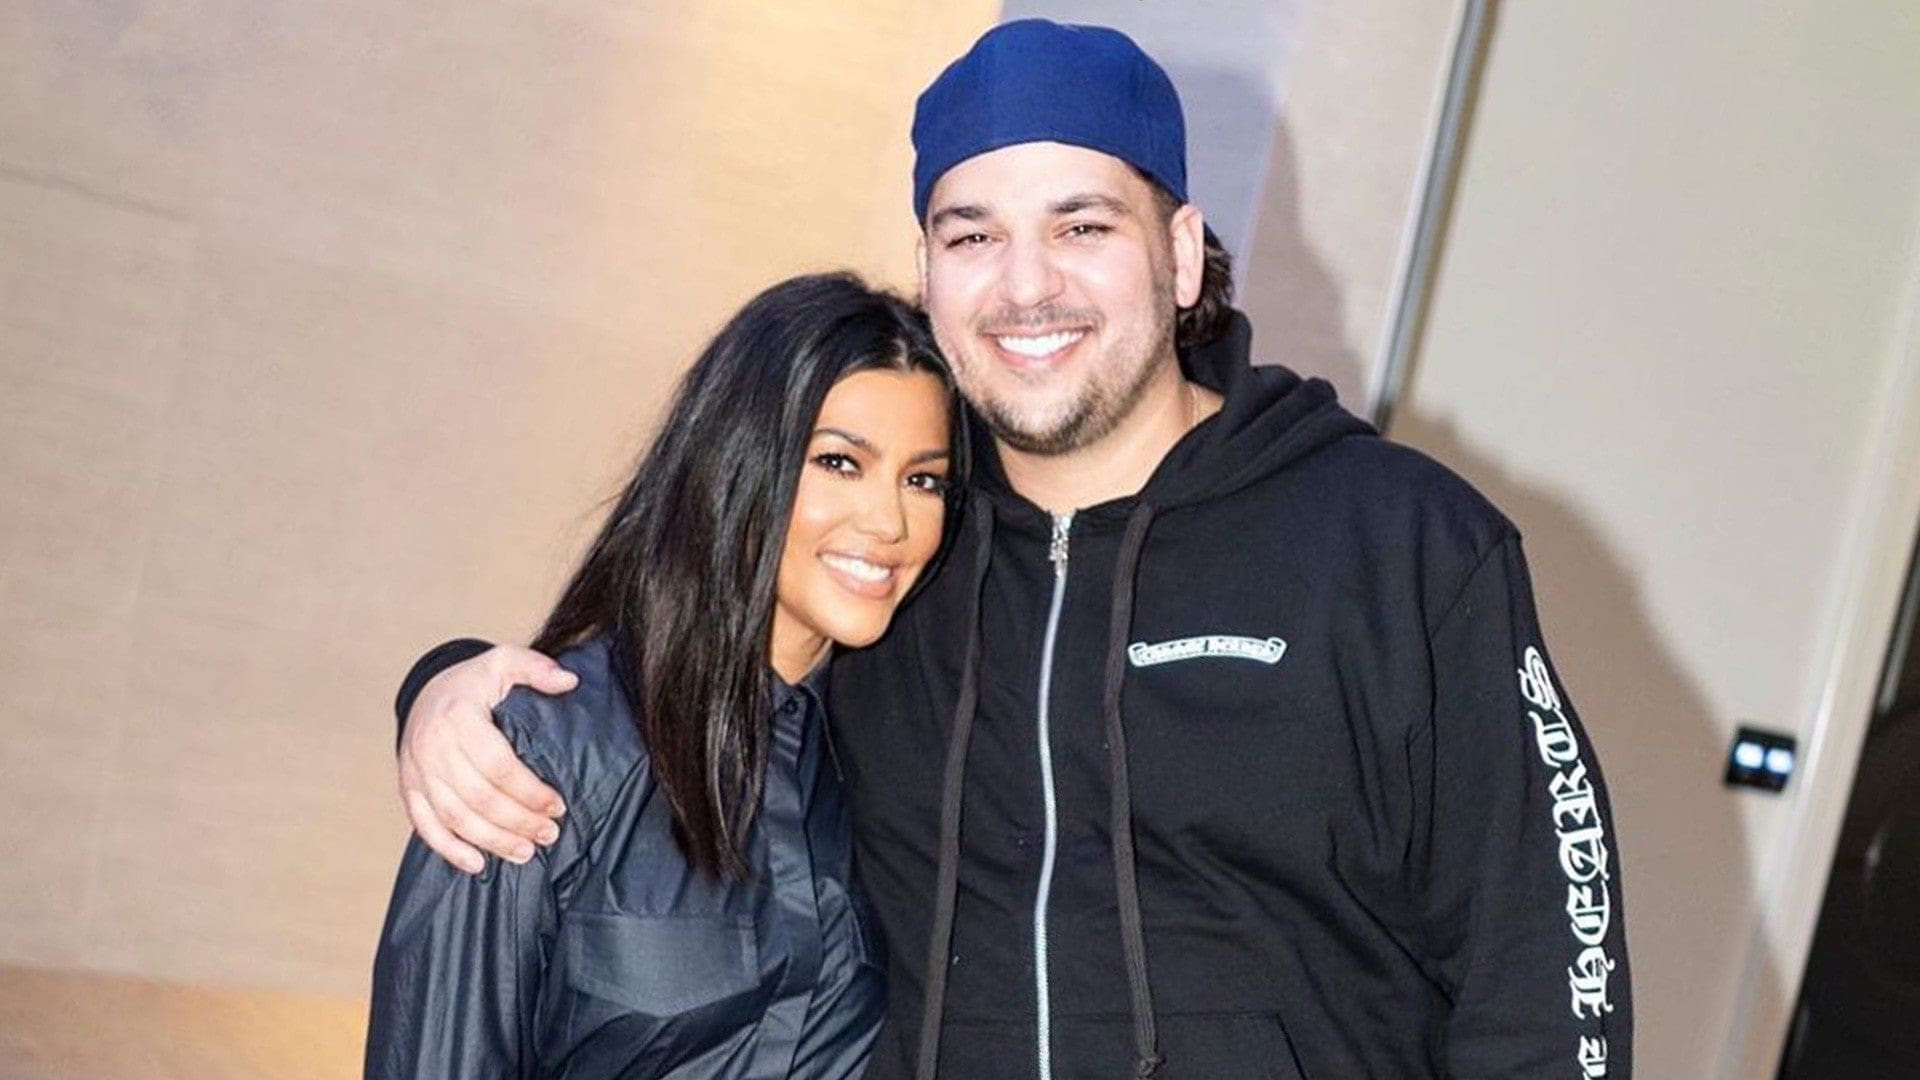 kuwk-rob-kardashian-not-done-transforming-his-body-after-weight-loss-wants-to-get-toned